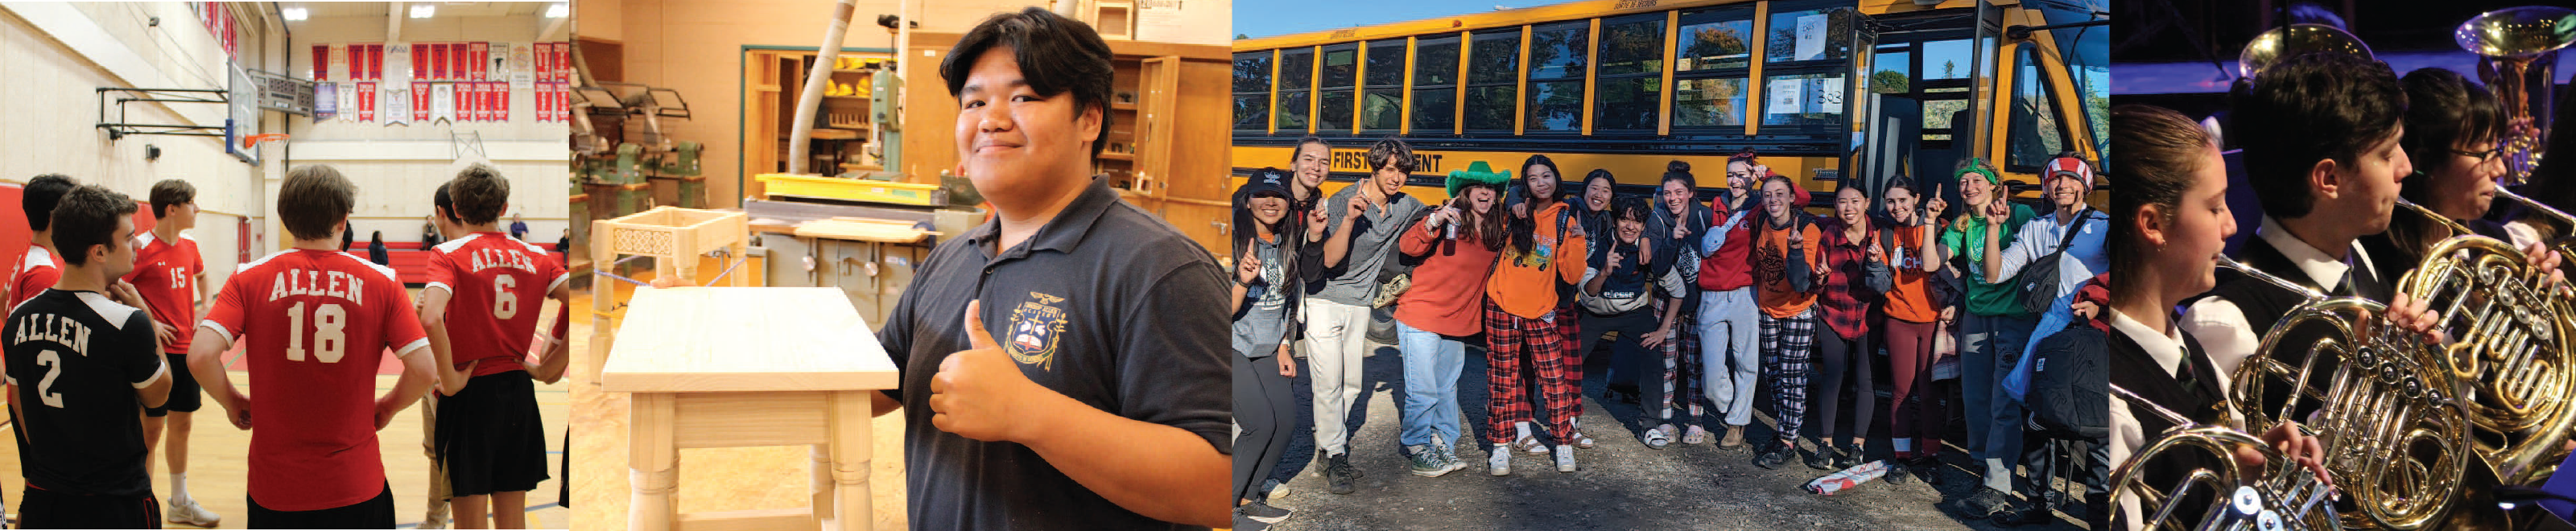 First image features a team of male volleyball students. Second image consists of a male student in uniform in a woodworking class. Third image consists of a group of students standing in front of a school bus. The forth image consists of a group of students playing musical instruments. 